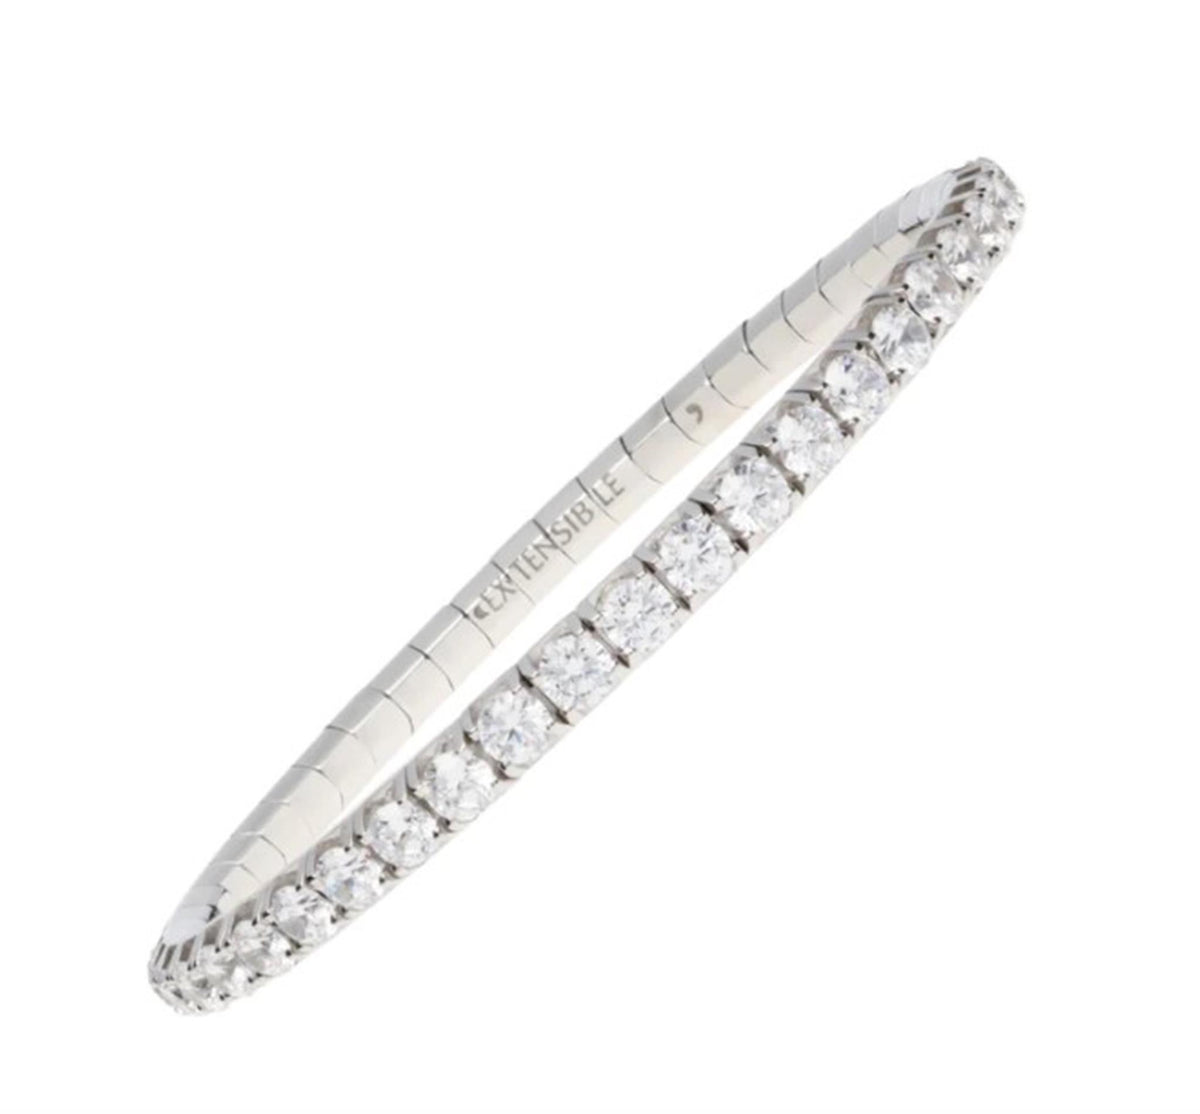 18K White Gold Extensible Bracelet with 9.05cttw Natural Diamonds